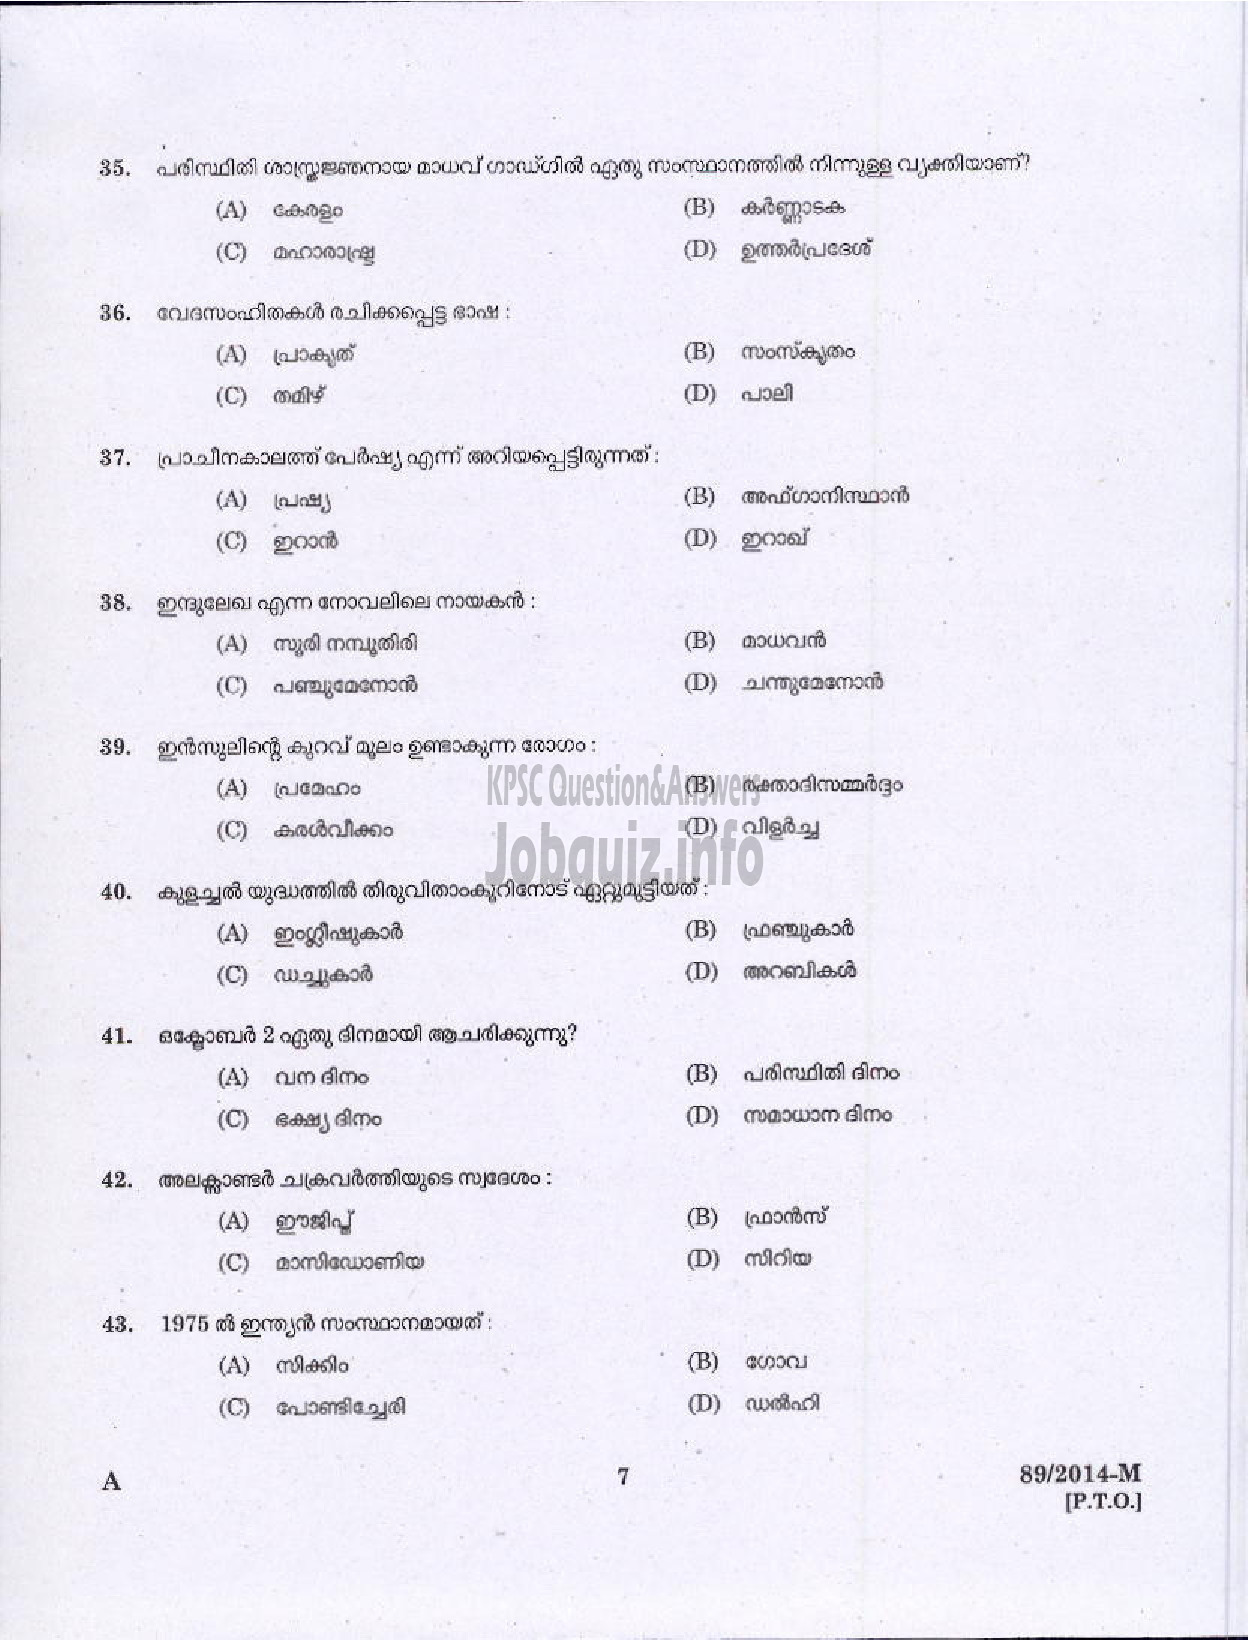 Kerala PSC Question Paper - ATTENDER SR FOR ST ONLY TCC LTD AND LGS NCA OBC VARIOUS KTYM ( Malayalam ) -5